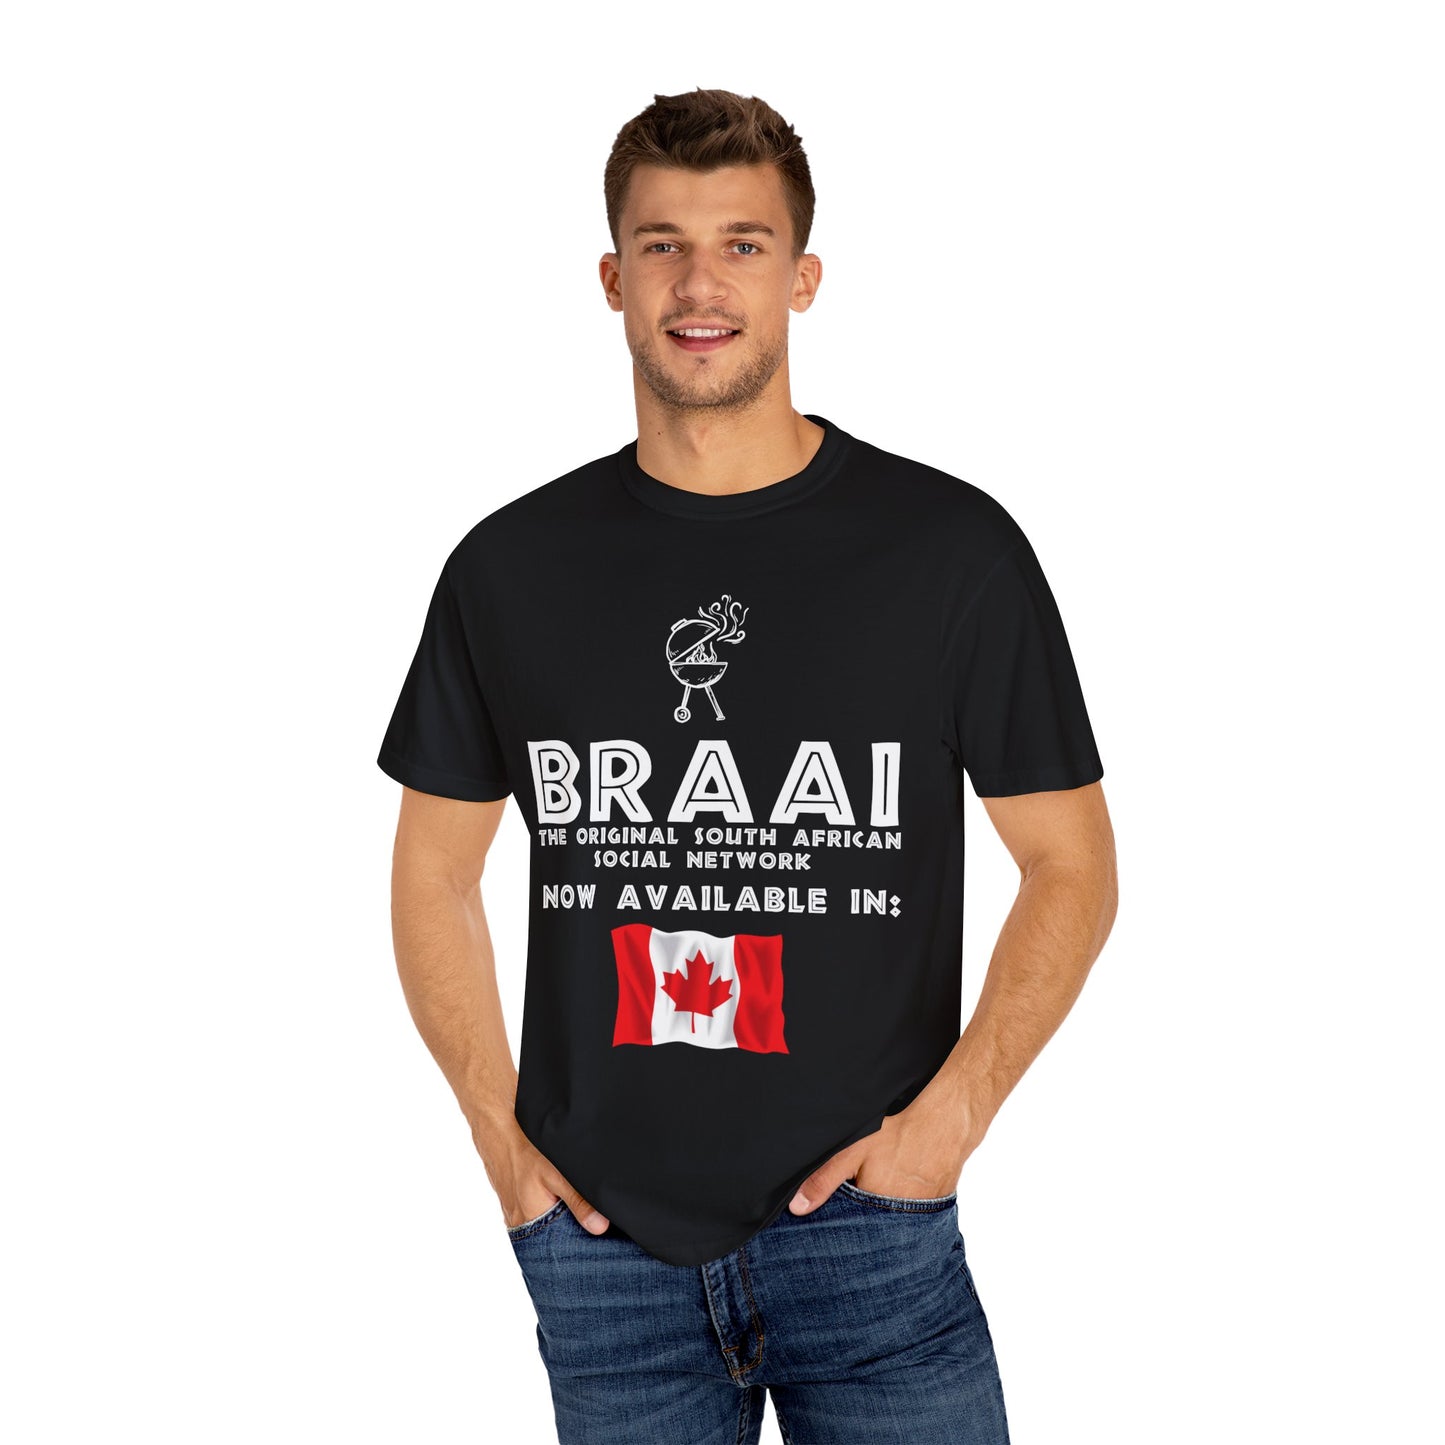 Braai - The Original South African Social Network, Now Available in Canada.